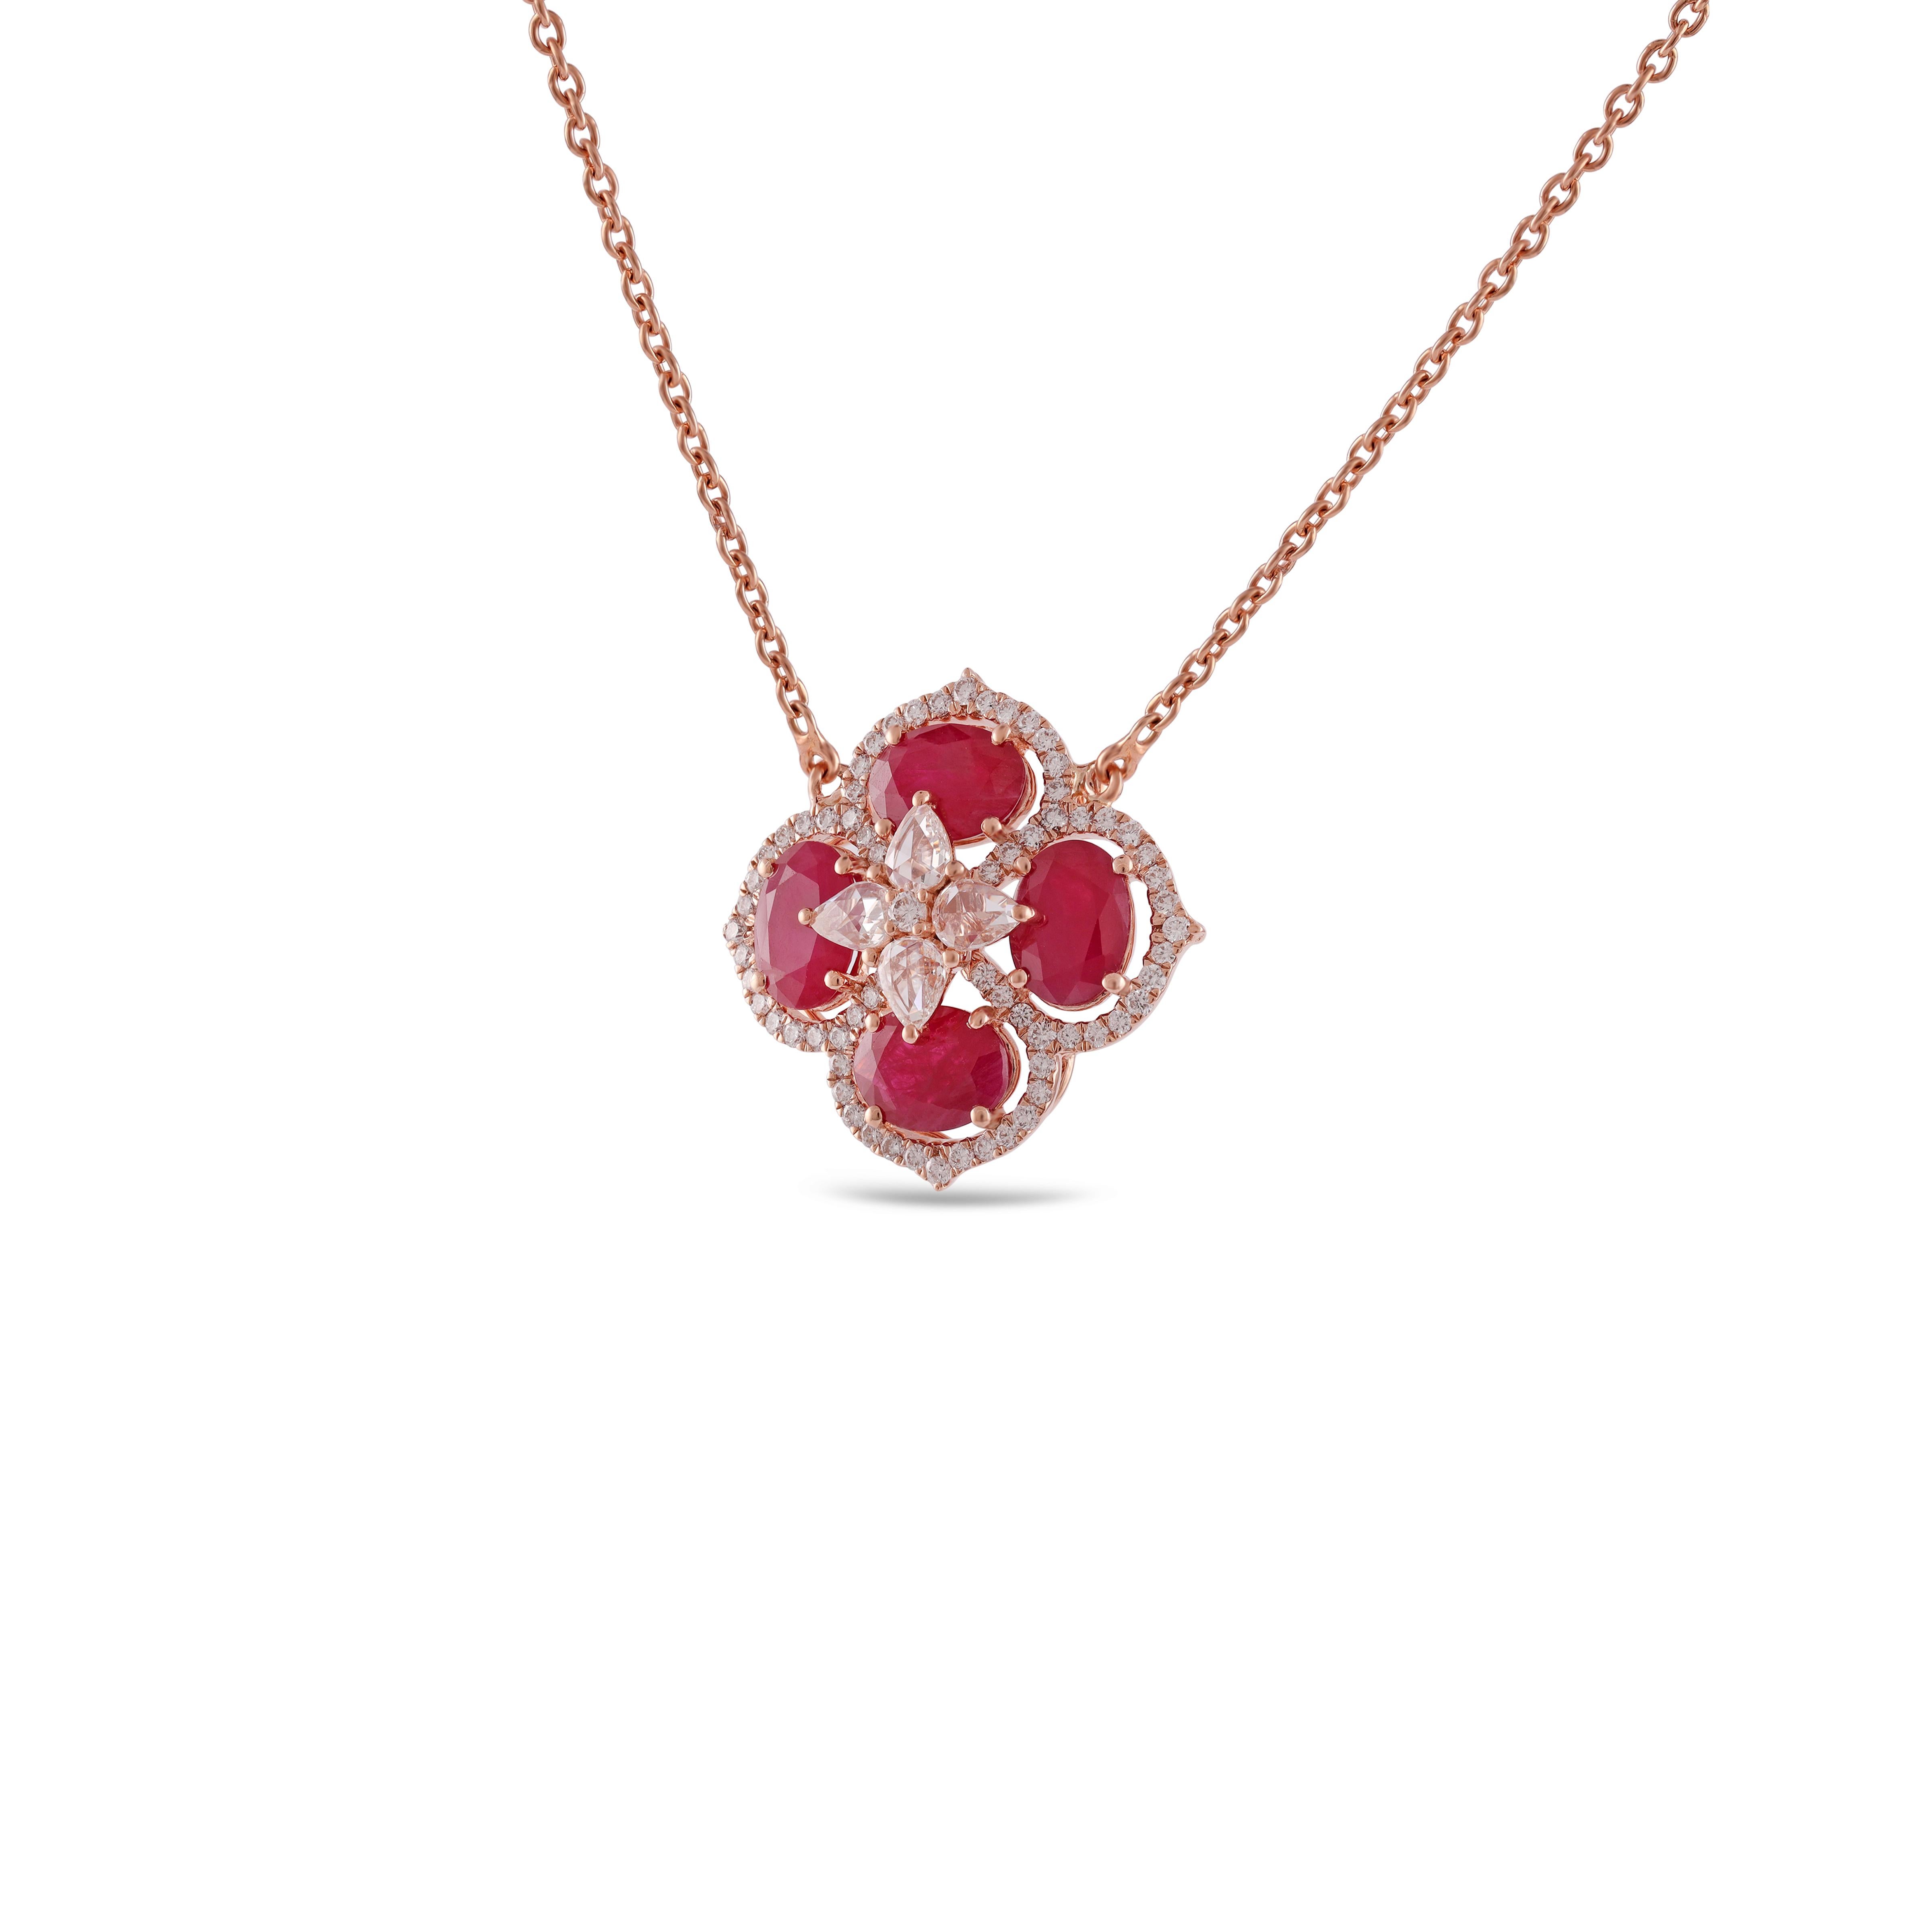  Oval Cut Ruby Pendant Necklace in 18 Karat Gold with Diamond In New Condition For Sale In Jaipur, Rajasthan